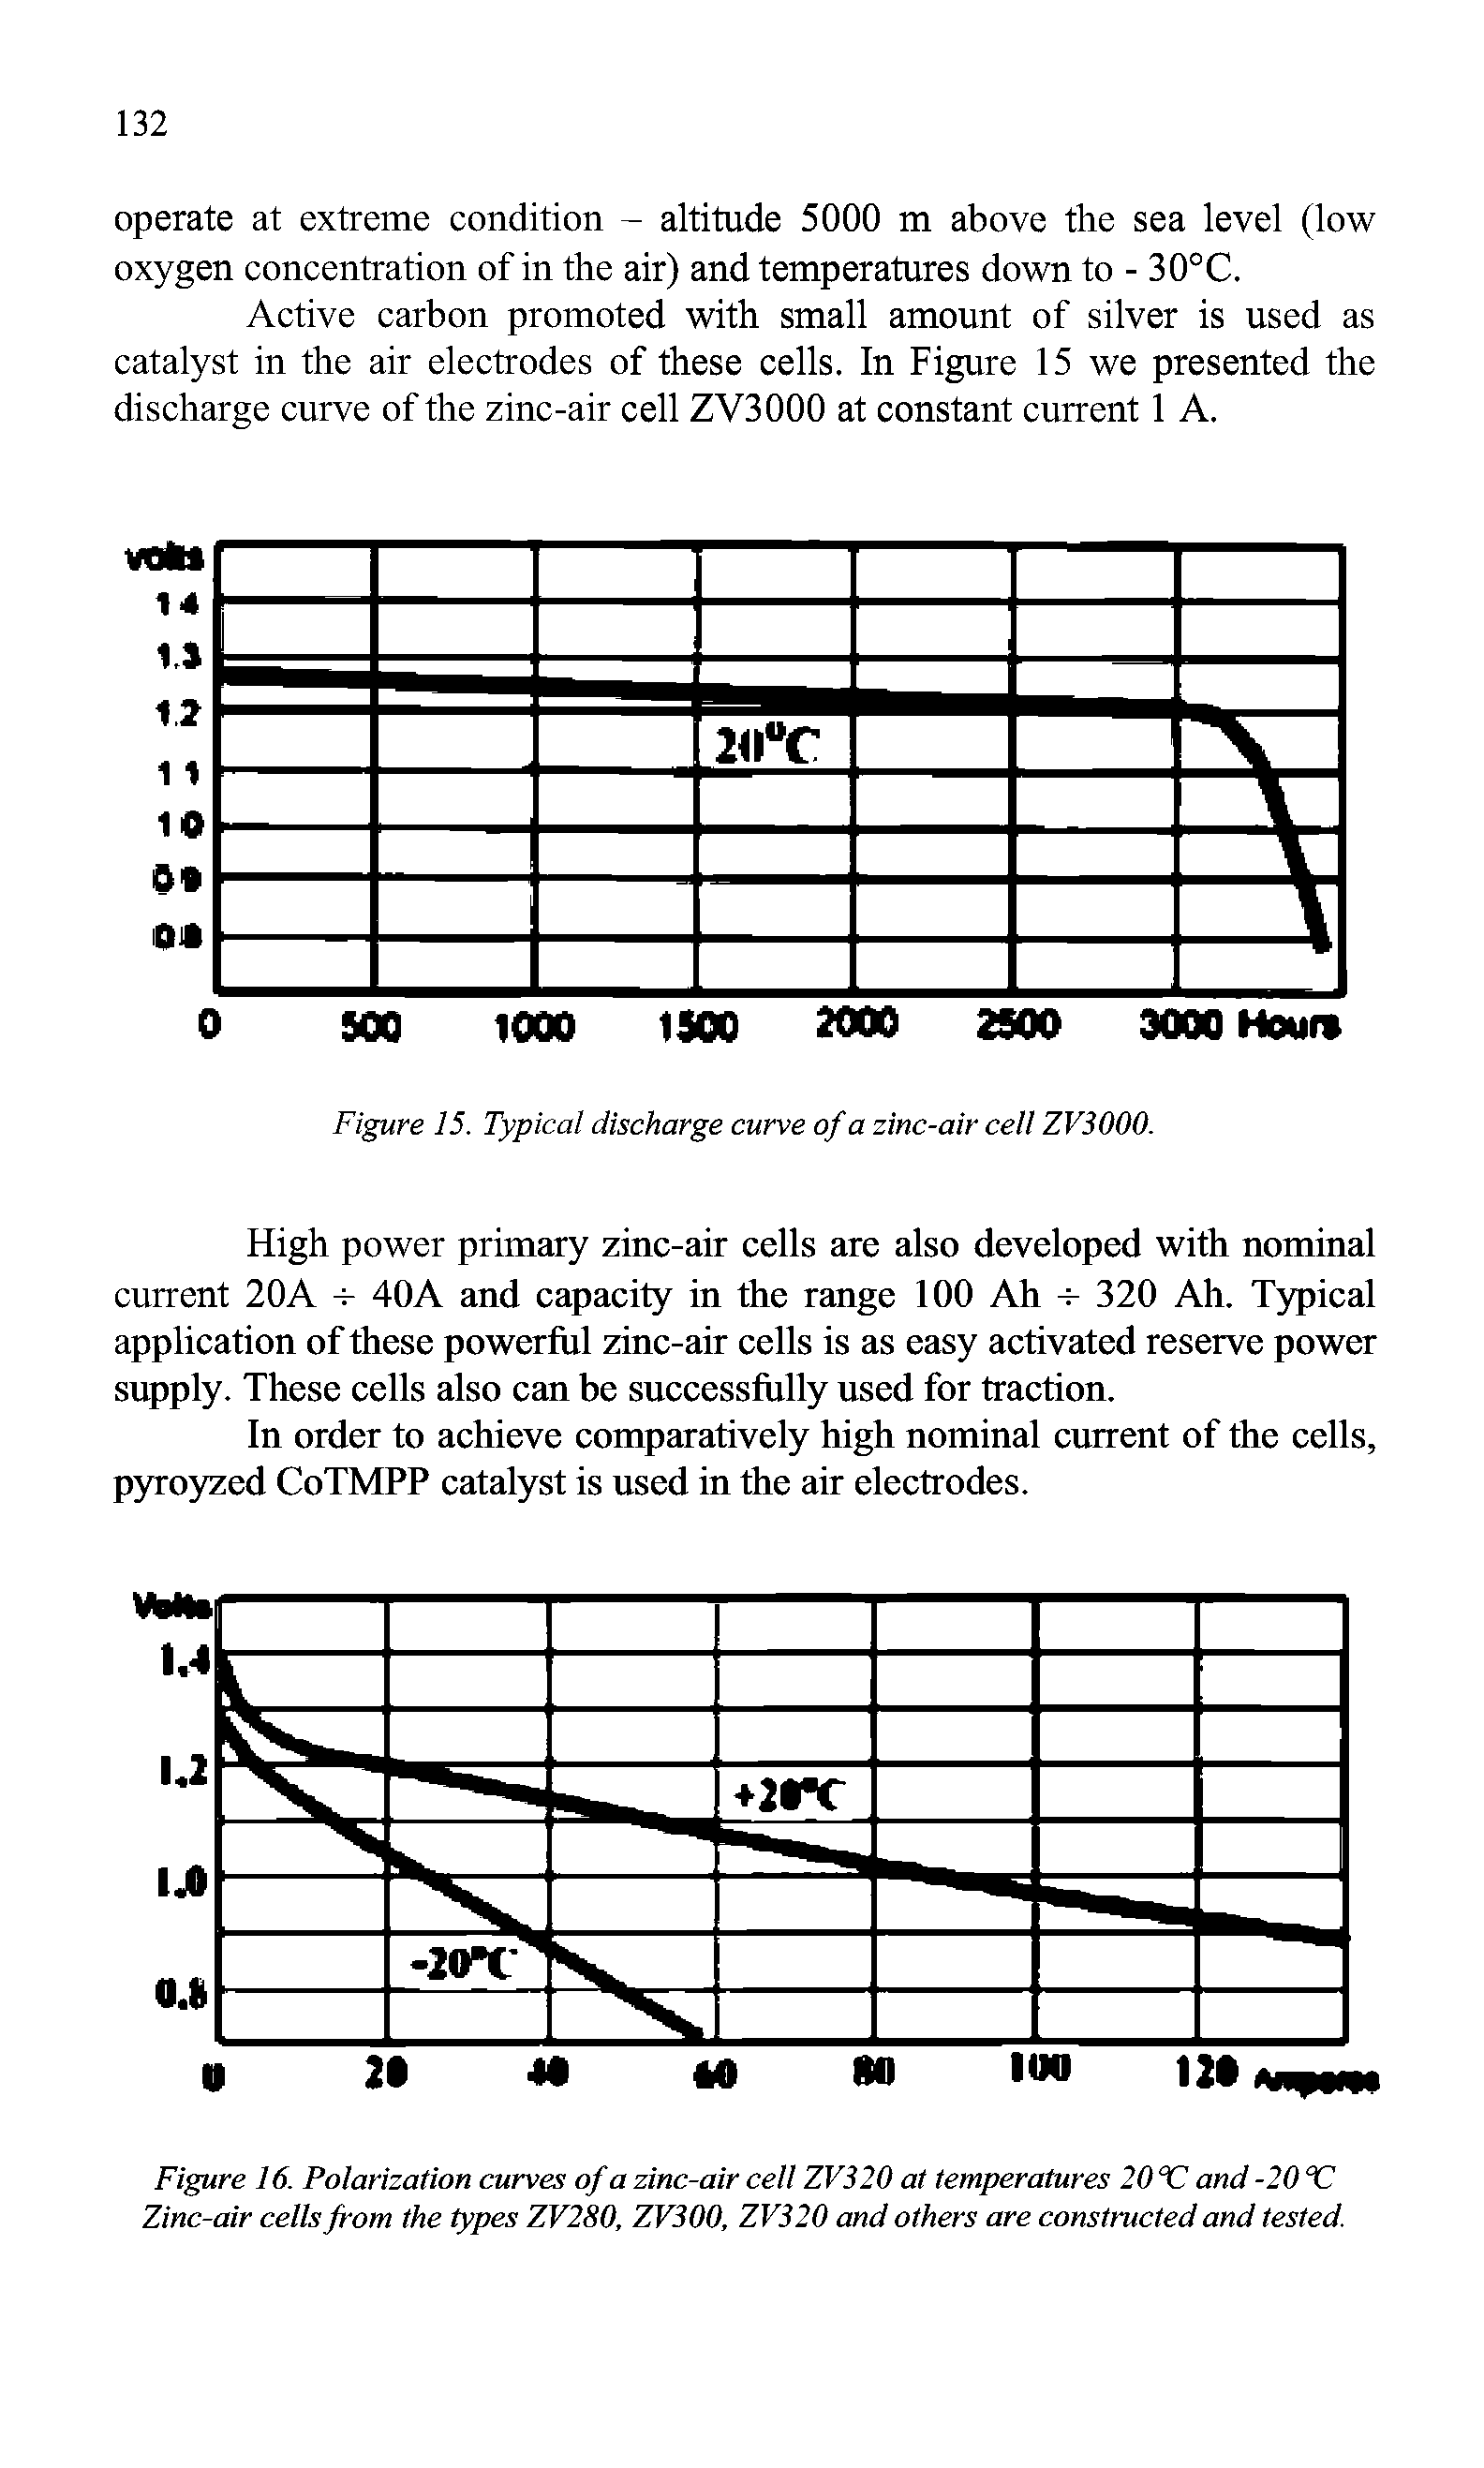 Figure 15. Typical discharge curve of a zinc-air cell ZV3000.